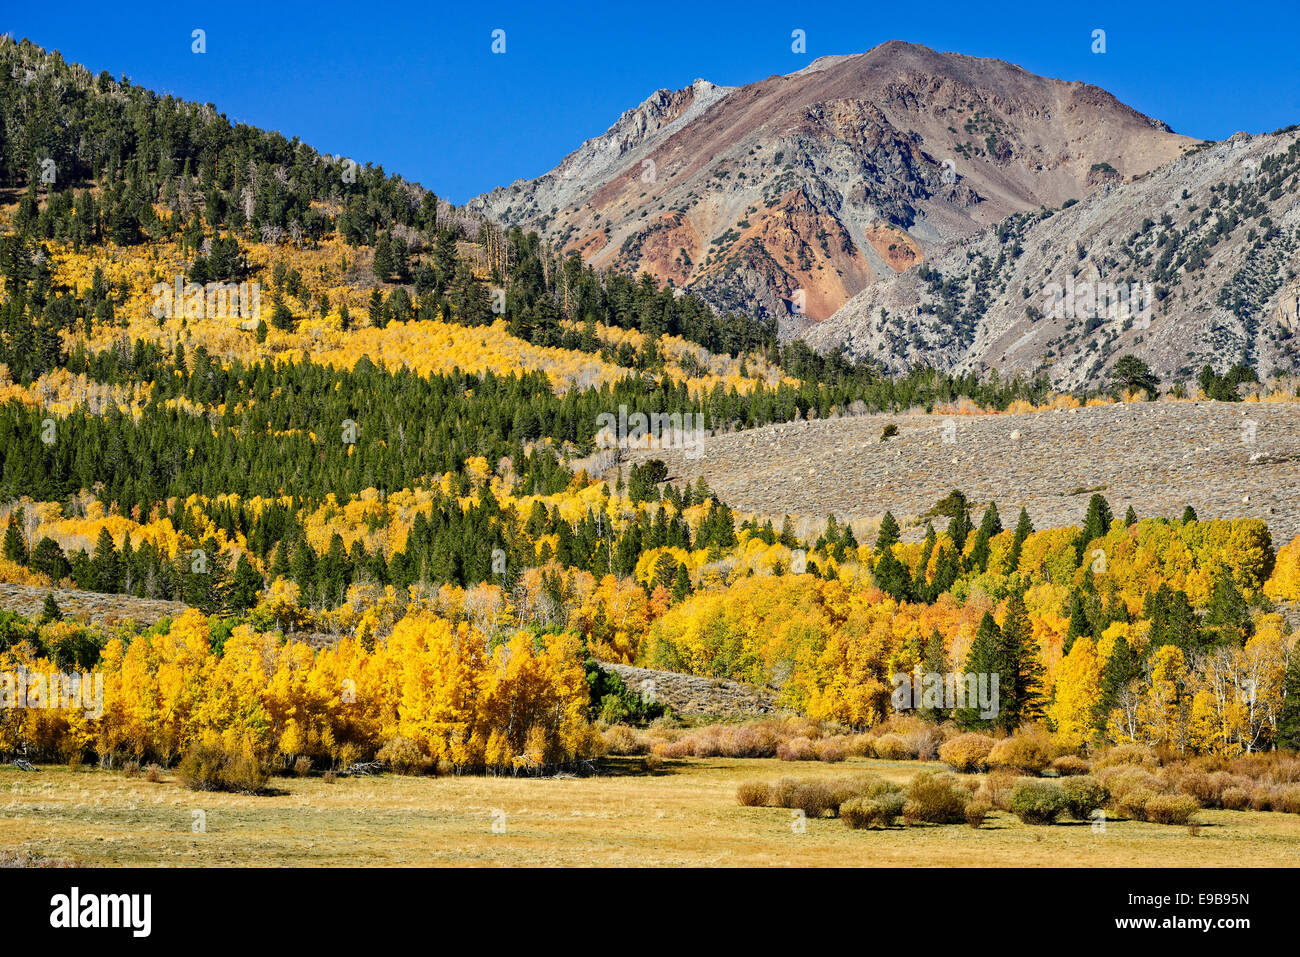 Aspen trees in fall color at Dunderberg Meadows, eastern Sierra Nevada Mountains, California. Stock Photo